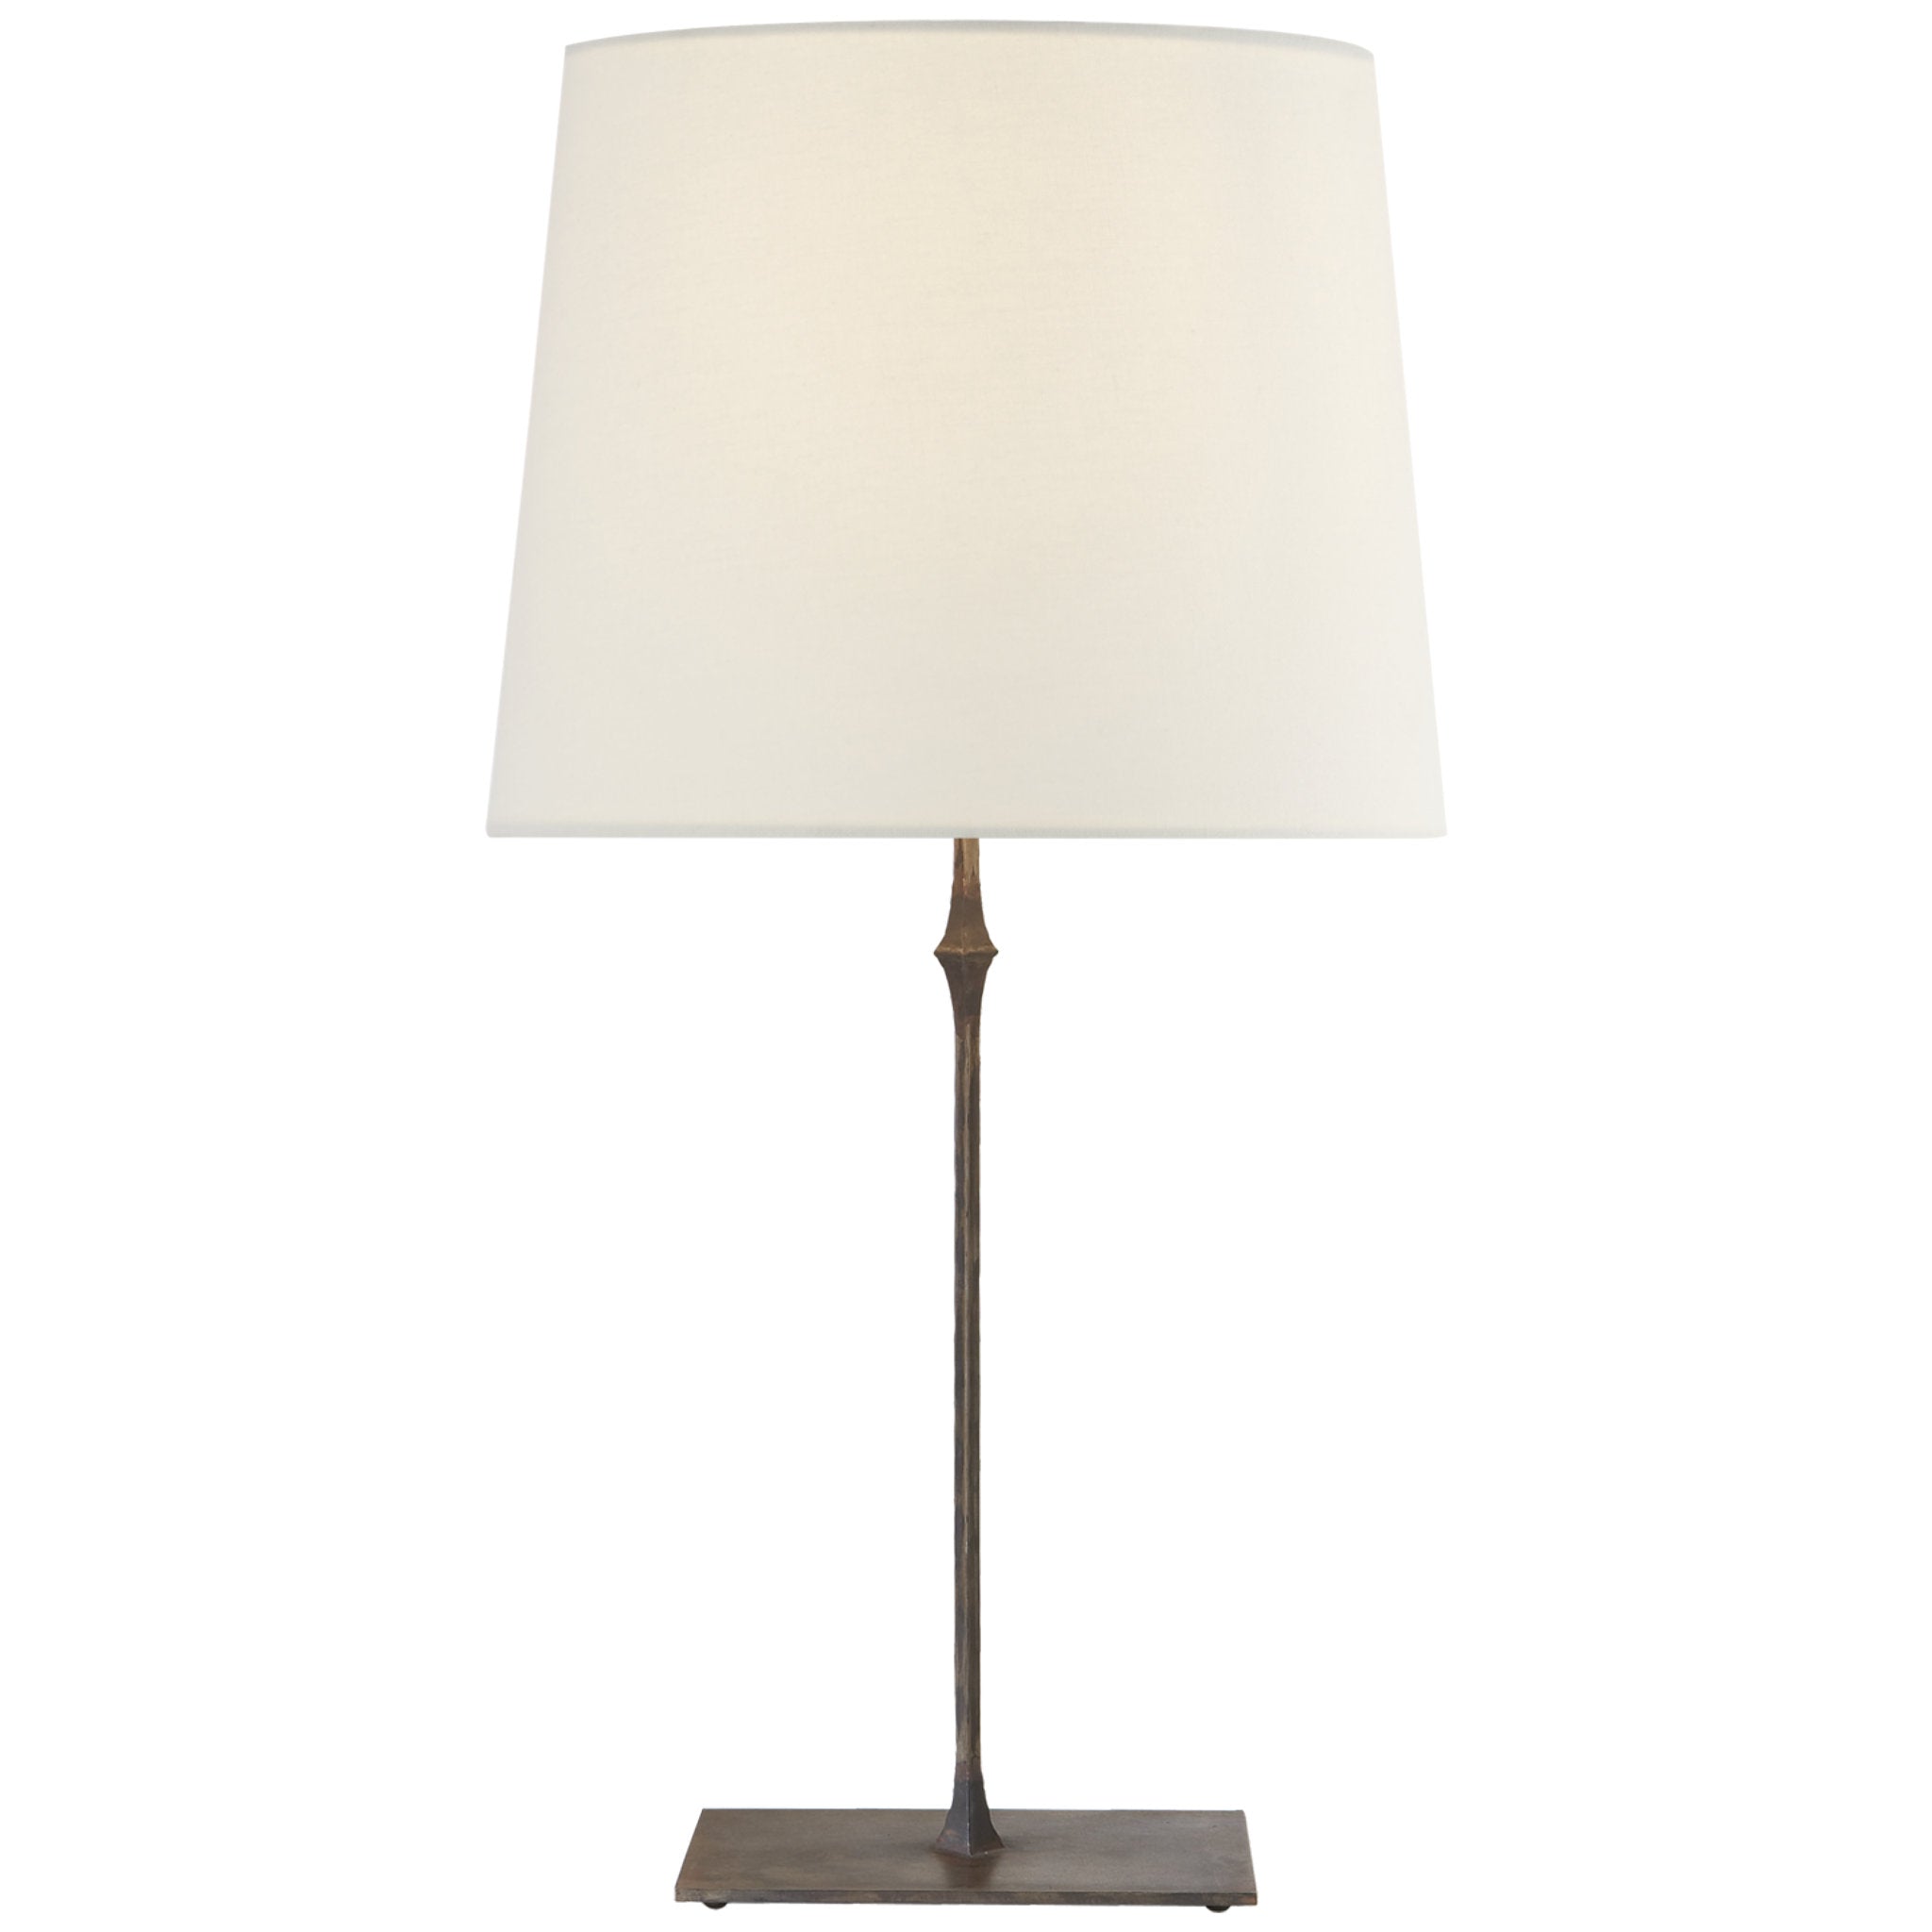 Visual Comfort Dauphine Table Lamp in Aged Iron with Linen Shade